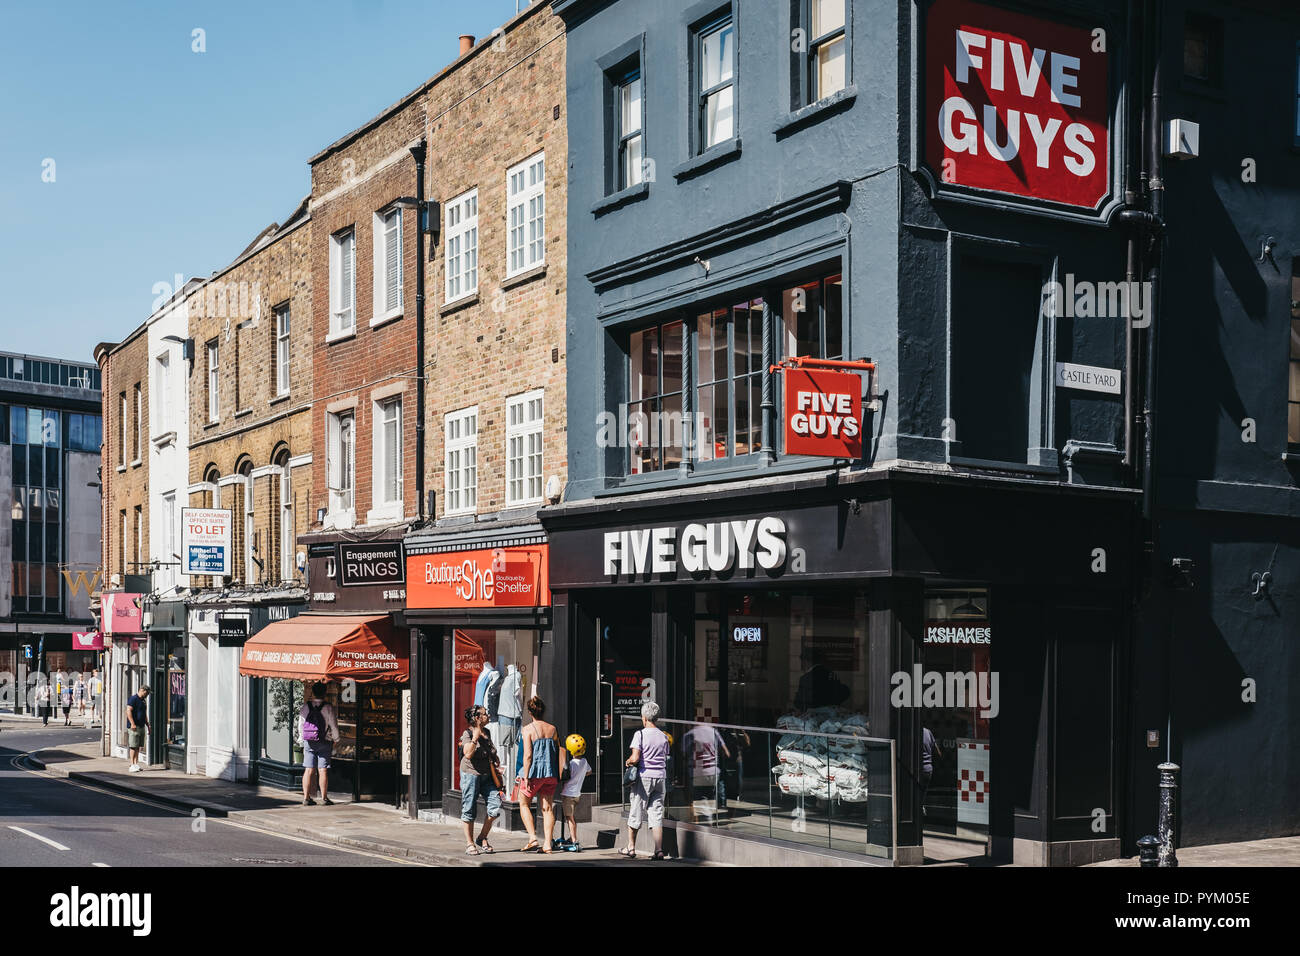 Richmond High Street High Resolution Stock Photography and Images - Alamy